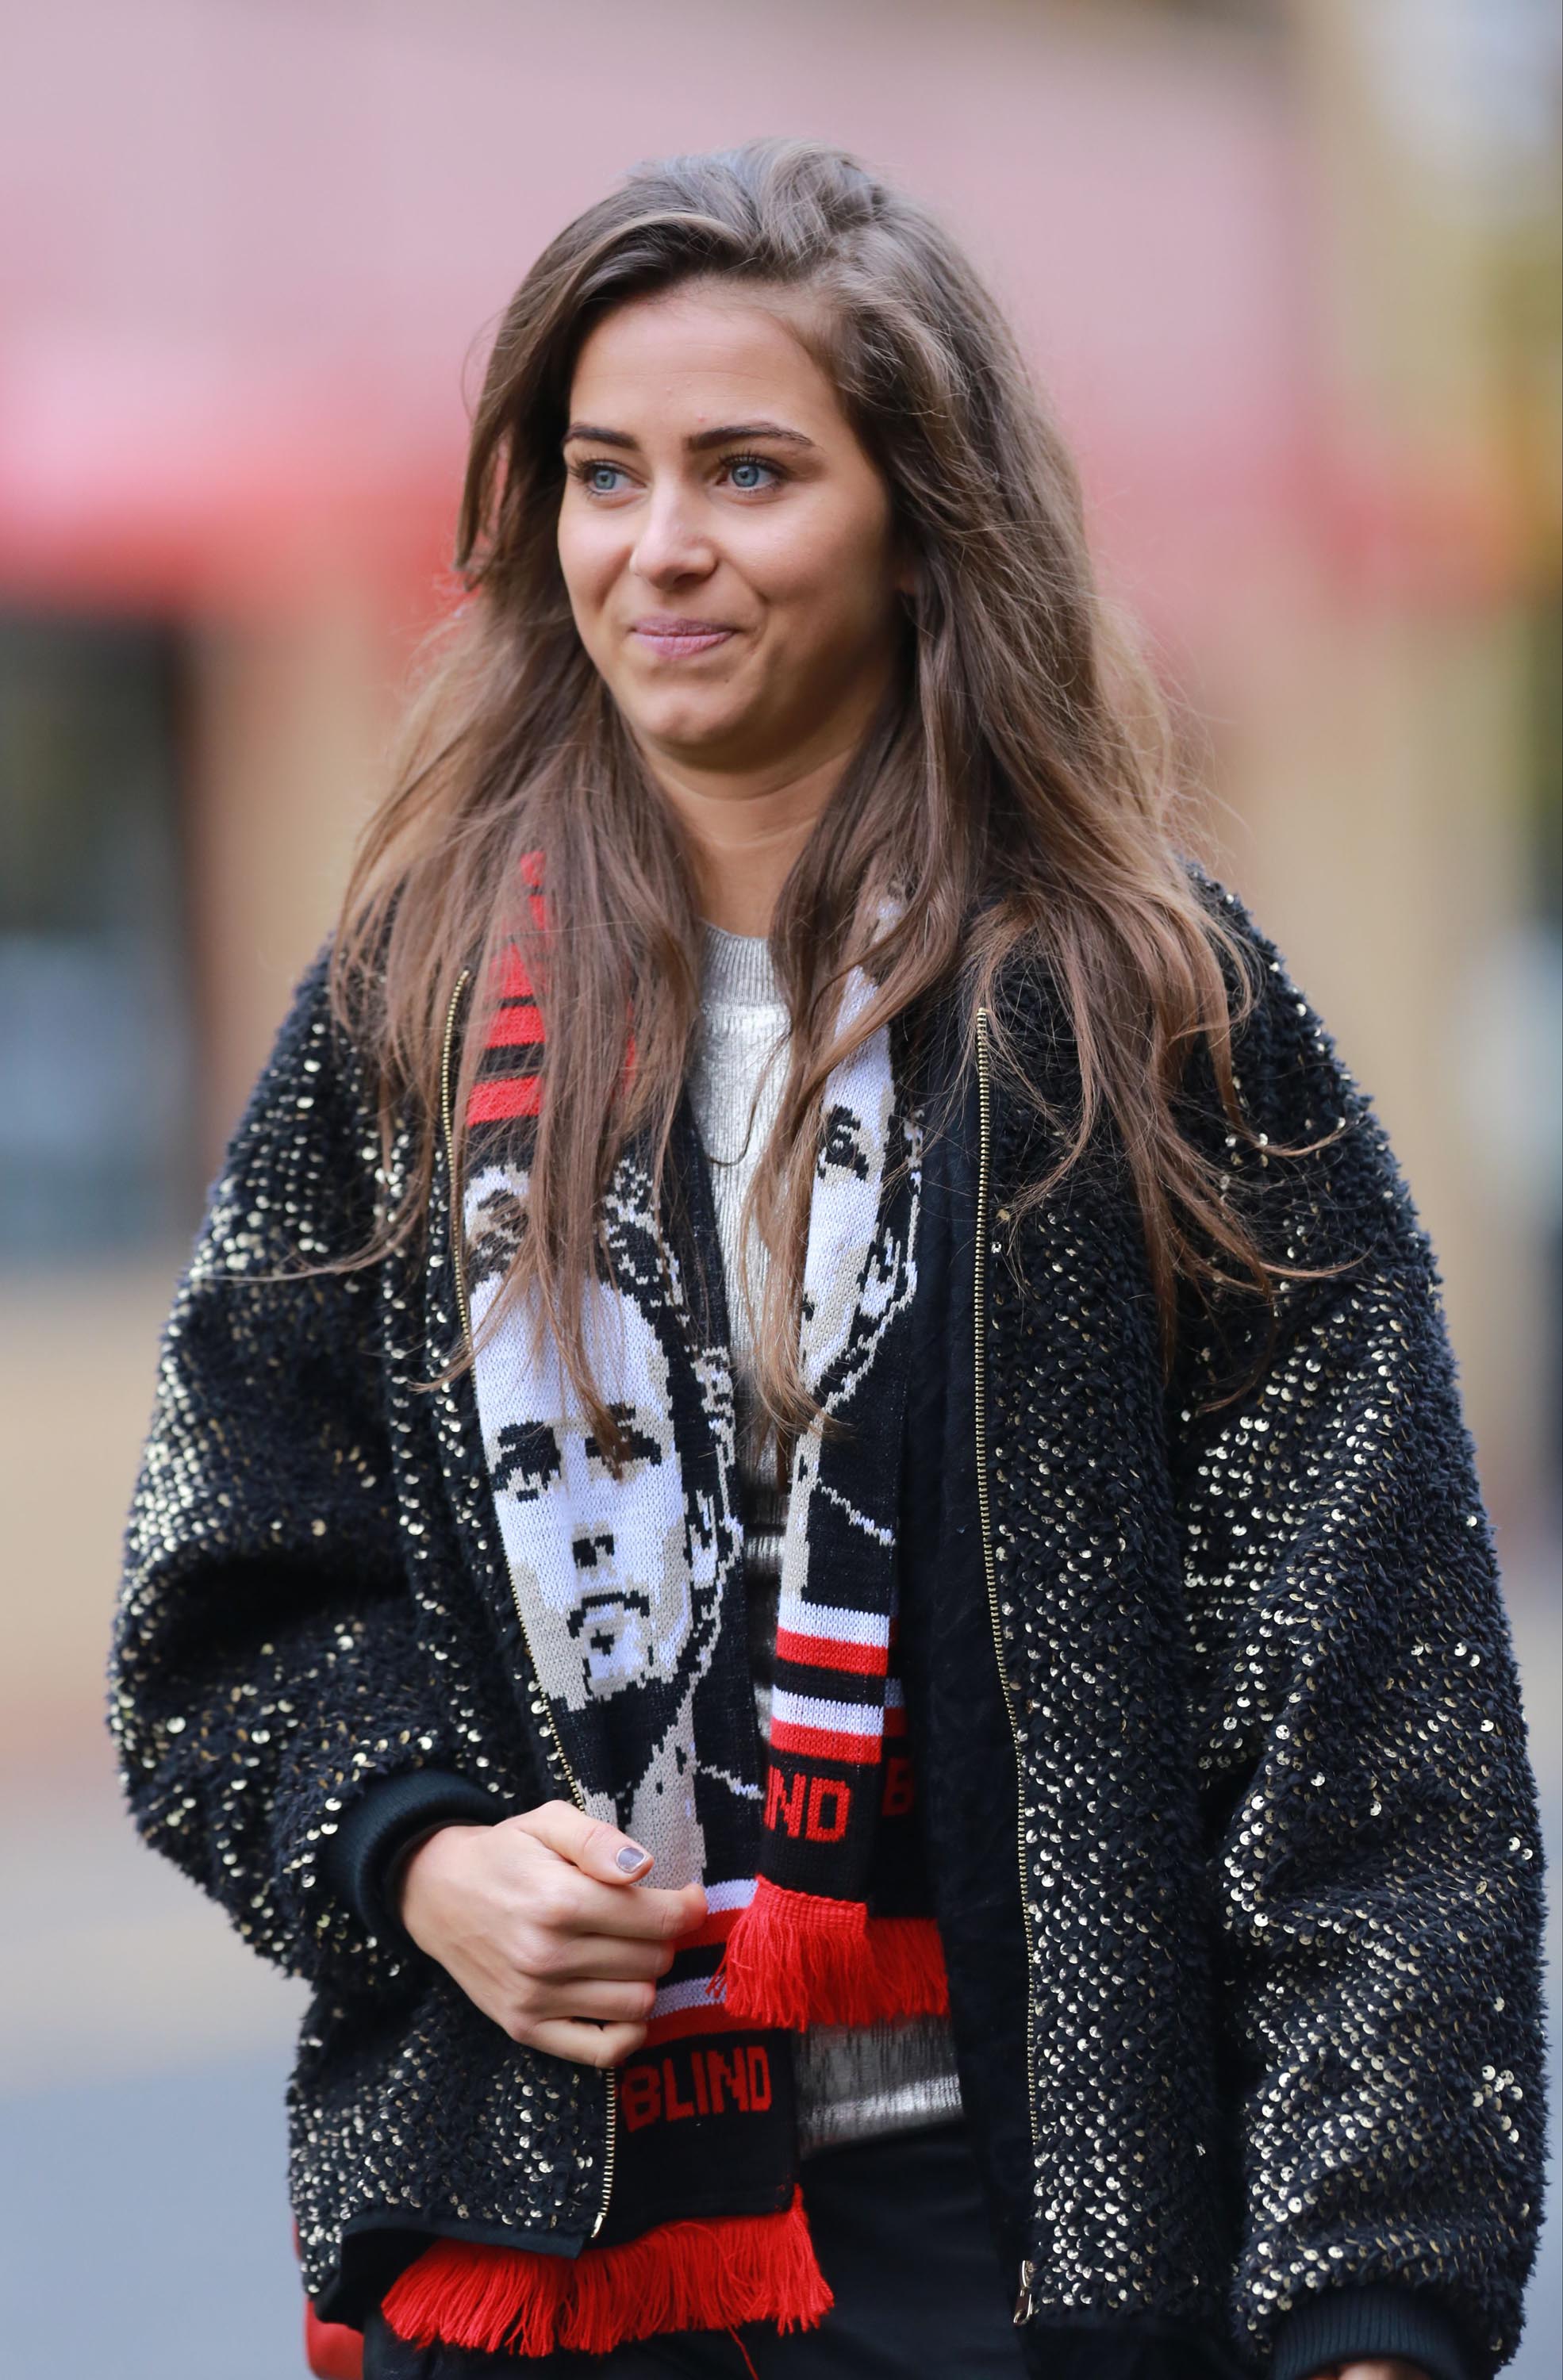 Candy Rae Fleur arriving at Old Trafford